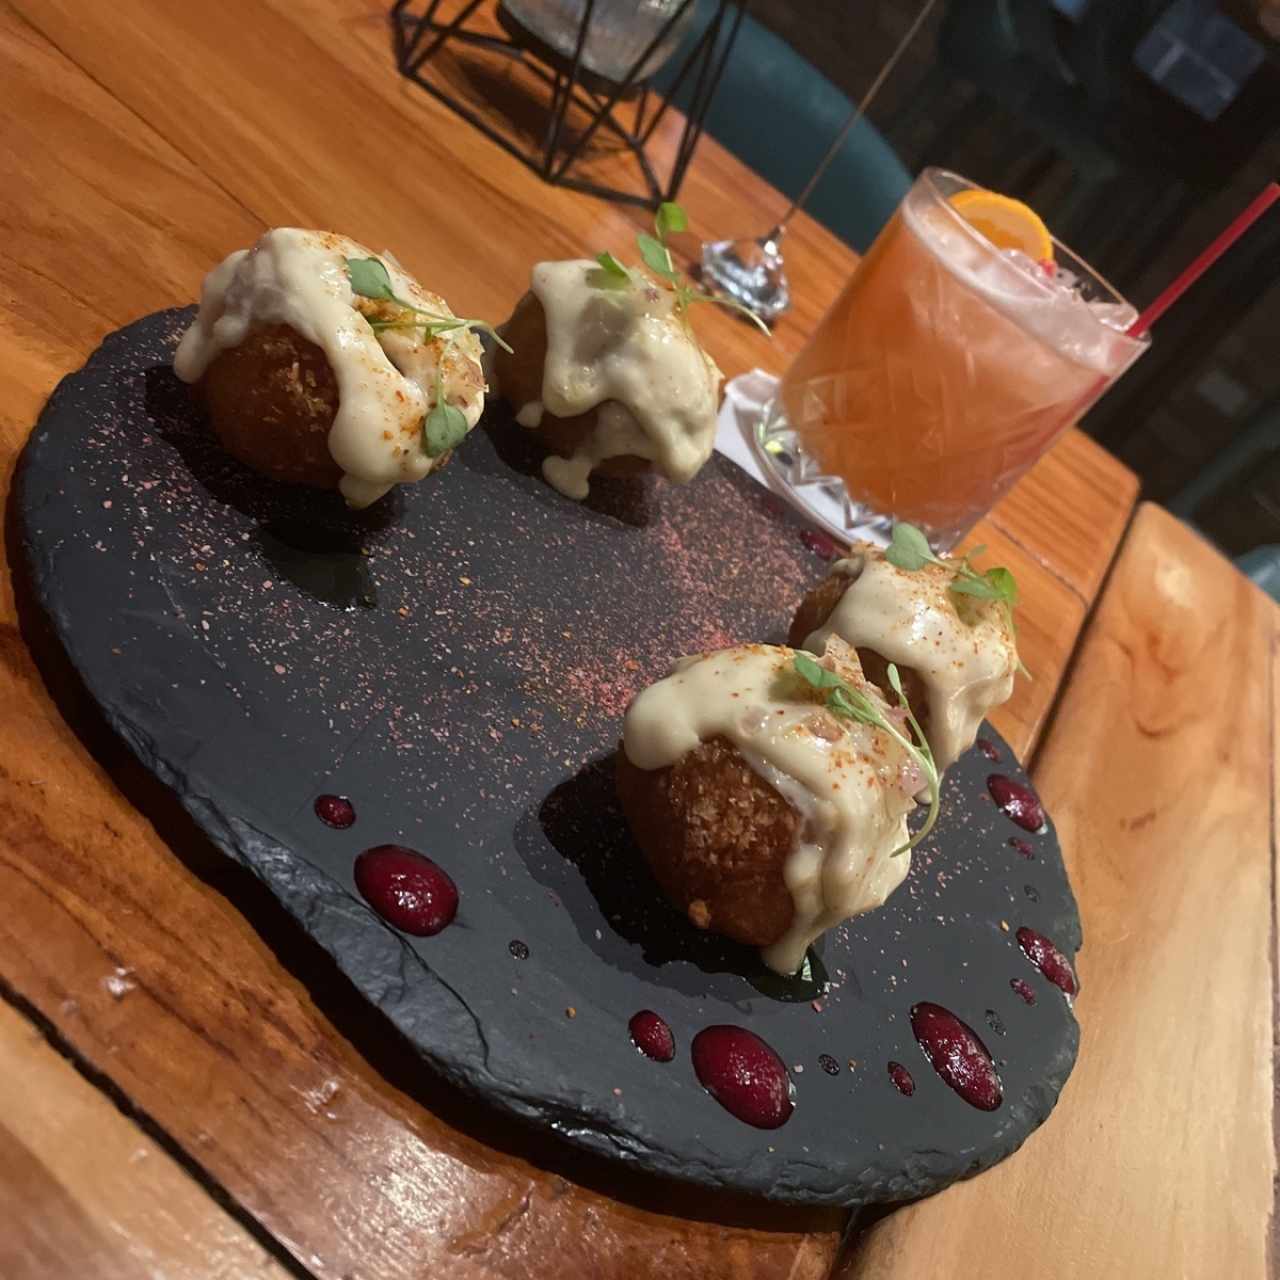 croquettes and Whisky sour